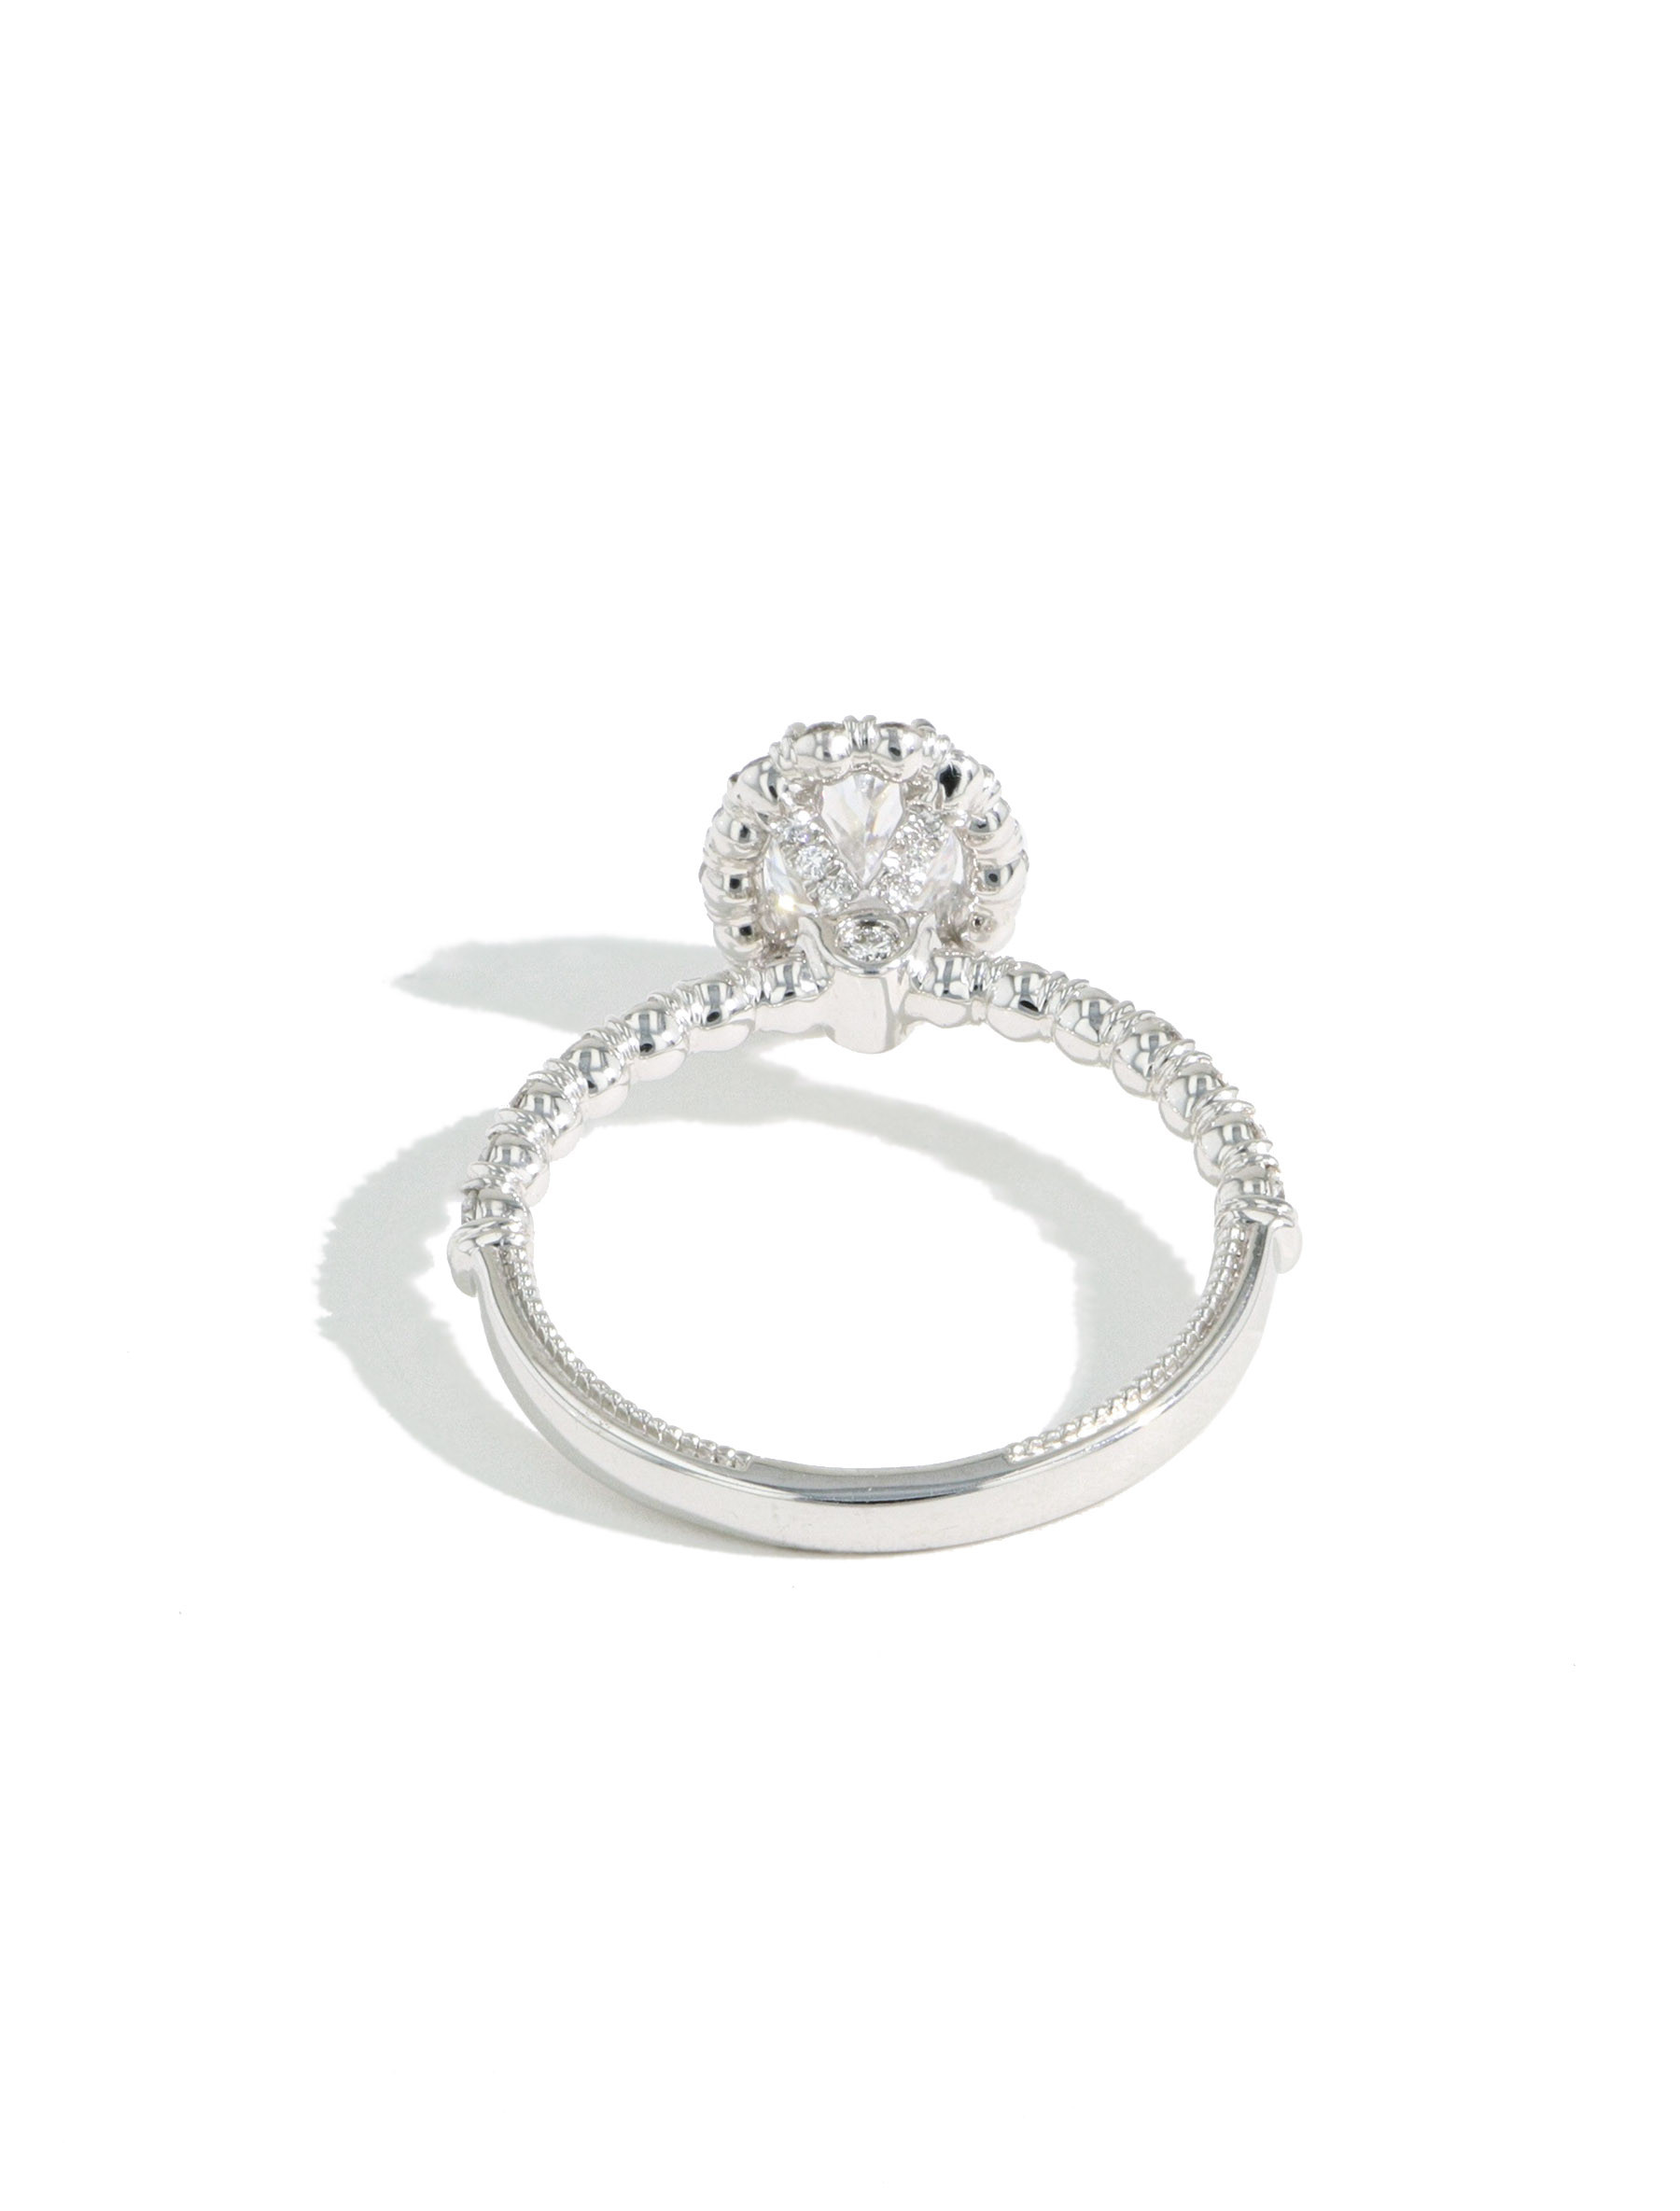 Verragio Classic Oval Halo Pave Engagement Ring Setting In 14k Gold